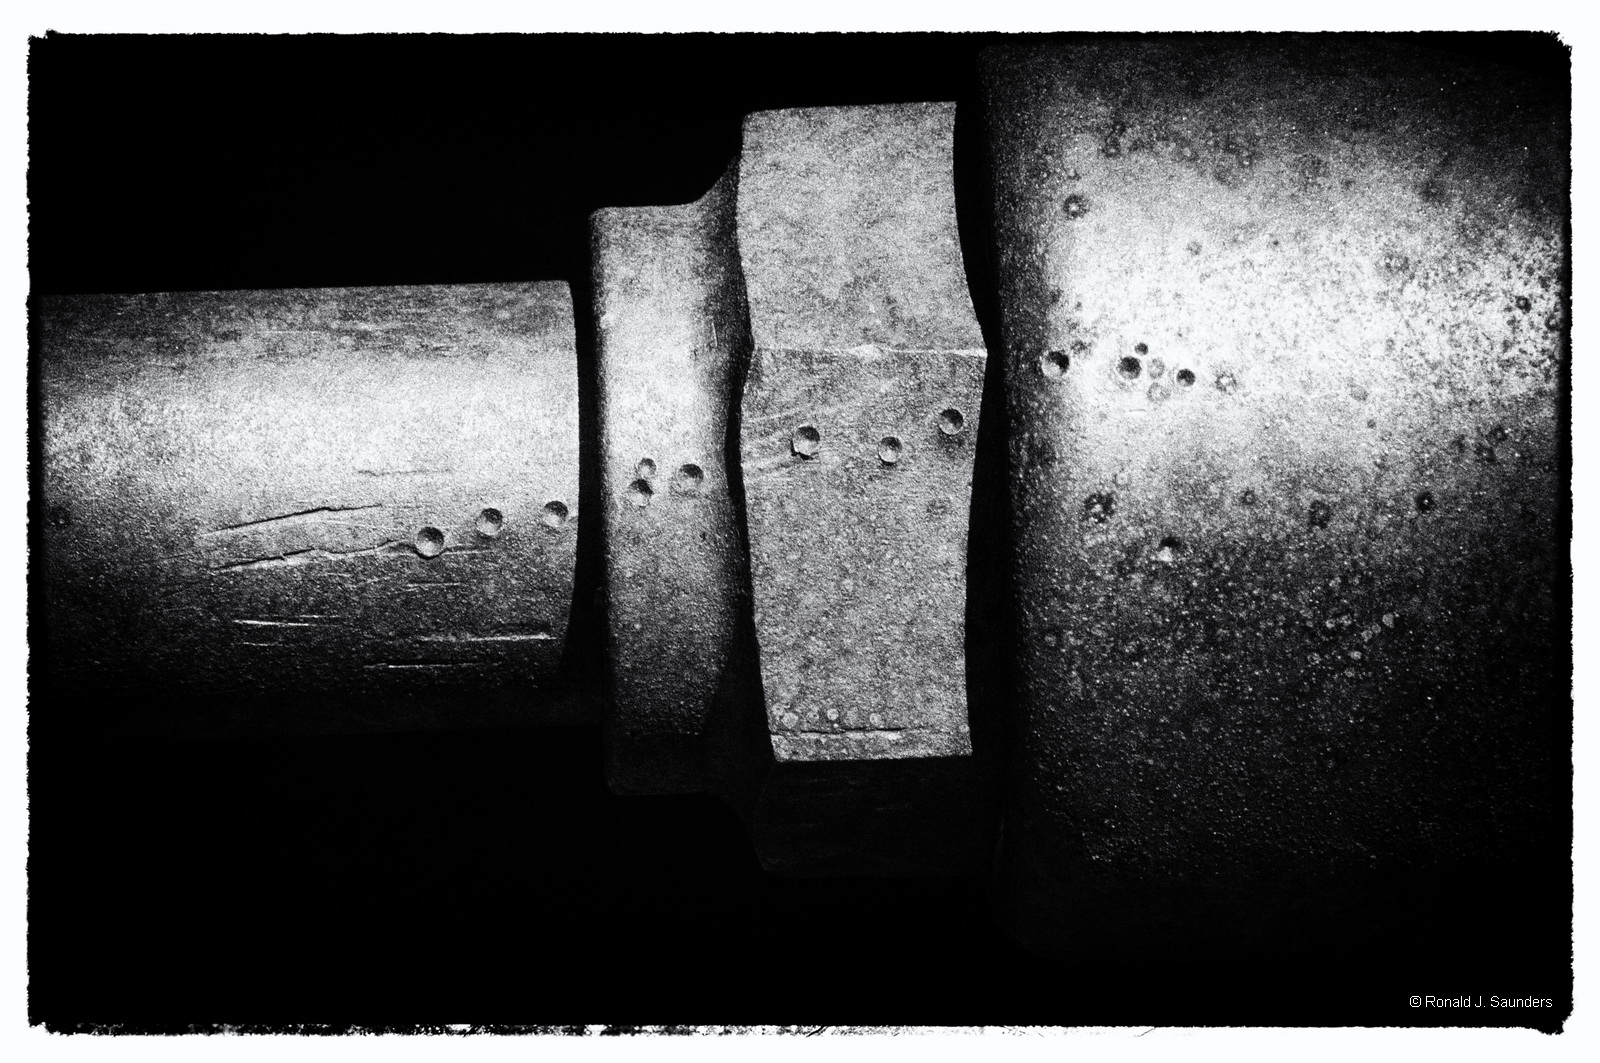 Punch marks in the steel are still clear and distinct on the surface of the steel parts. The marks may have been added by a mechanic...